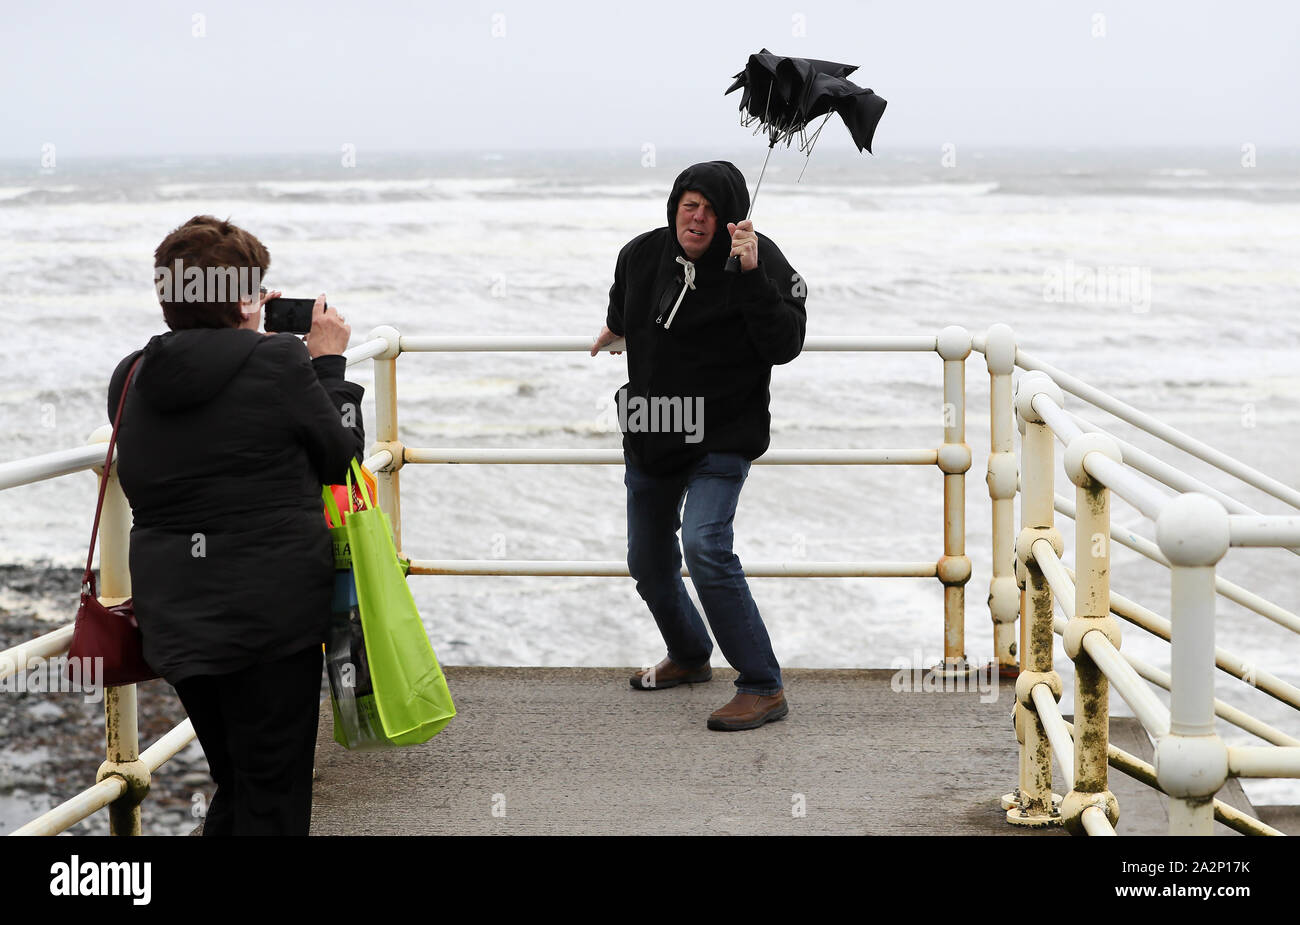 American tourists take photos with a broken umbrella along the sea front in Lahinch, County Clare, on the West Coast of Ireland as storm Lorenzo makes landfall, with a status orange wind warning and a yellow rain warning having been issued. Stock Photo